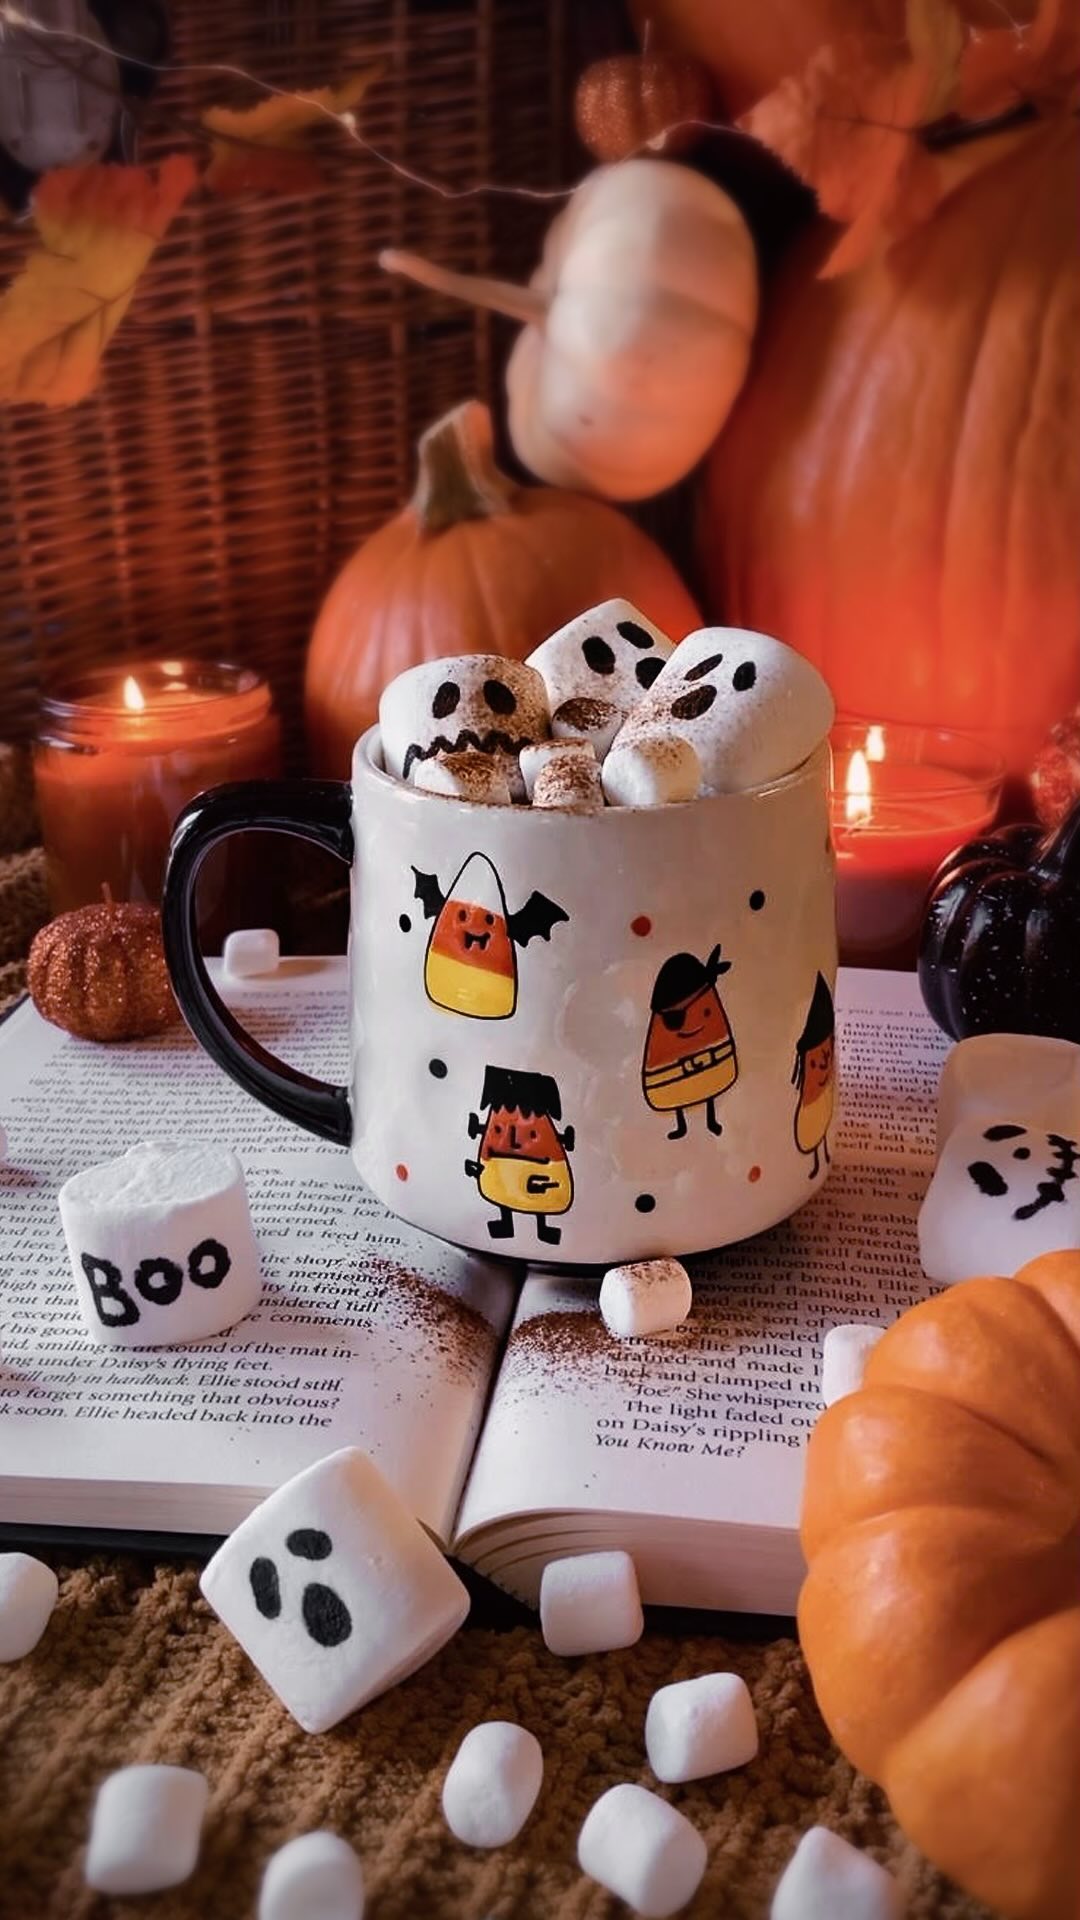 O c t o b e r 🍂Pumpkin spice and everything nice🍂

We are soaking up all the Halloween vibes here in the Giannoni home 🎃 6 more days until Halloween and I’m just as excited as my kids! 🎃
.
.
👻 This cute mug is from @homegoods and have you ever used edible food pens @michaelsstores to create spooky faces on marshmallows!!
.
#autumnleaves #autumnlove #autumn2022